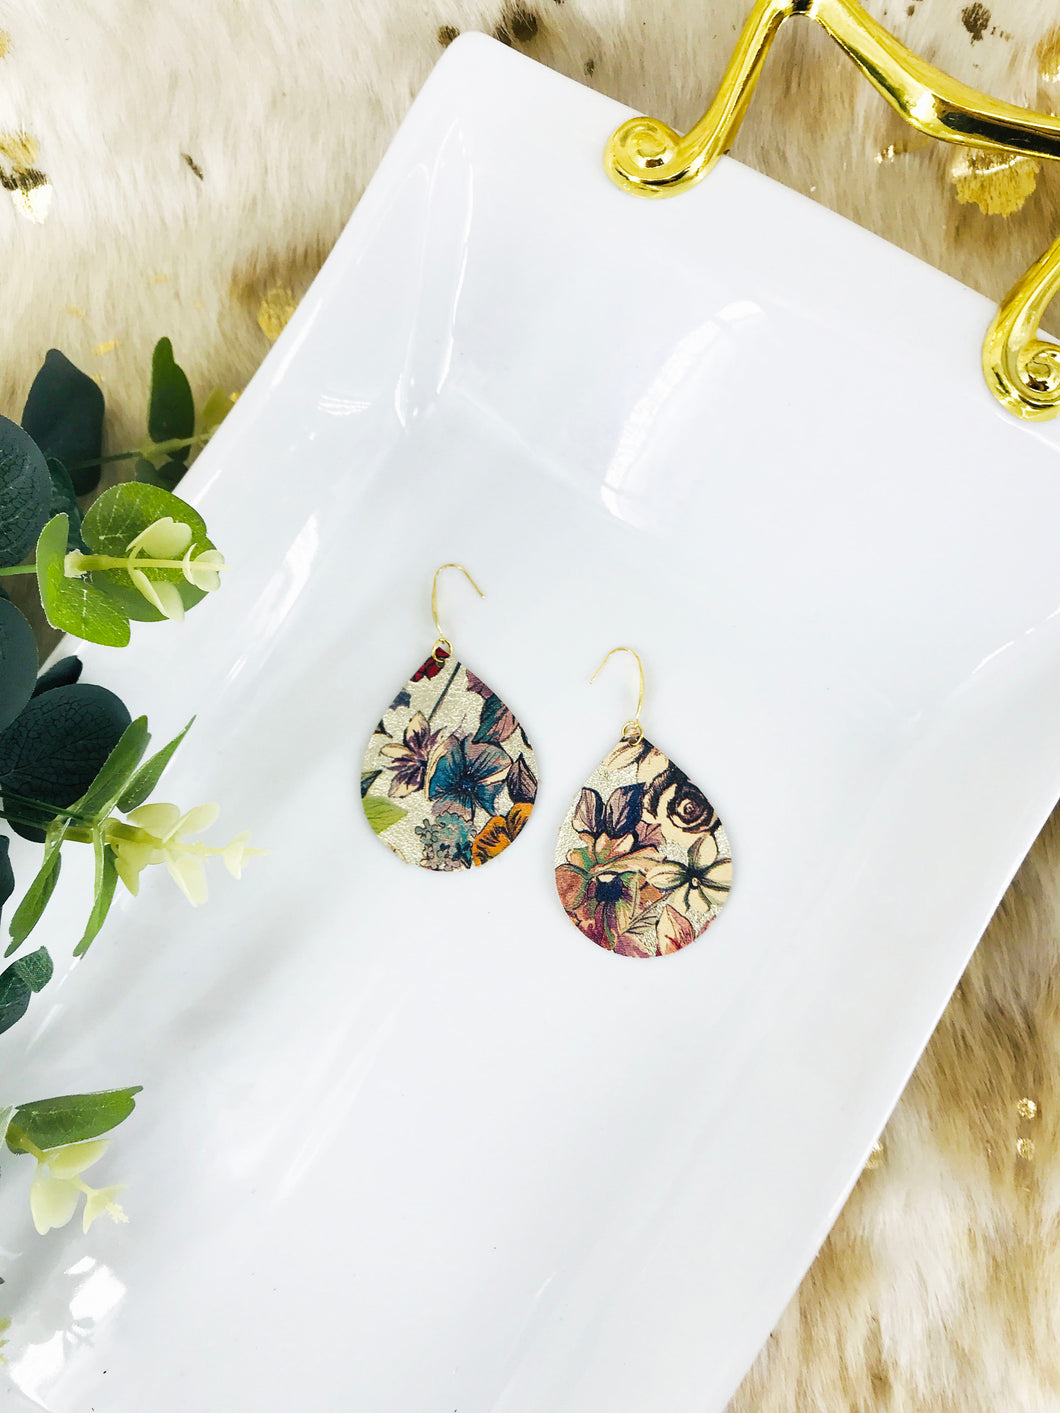 Genuine Floral Pattern Leather Earrings - E19-2680